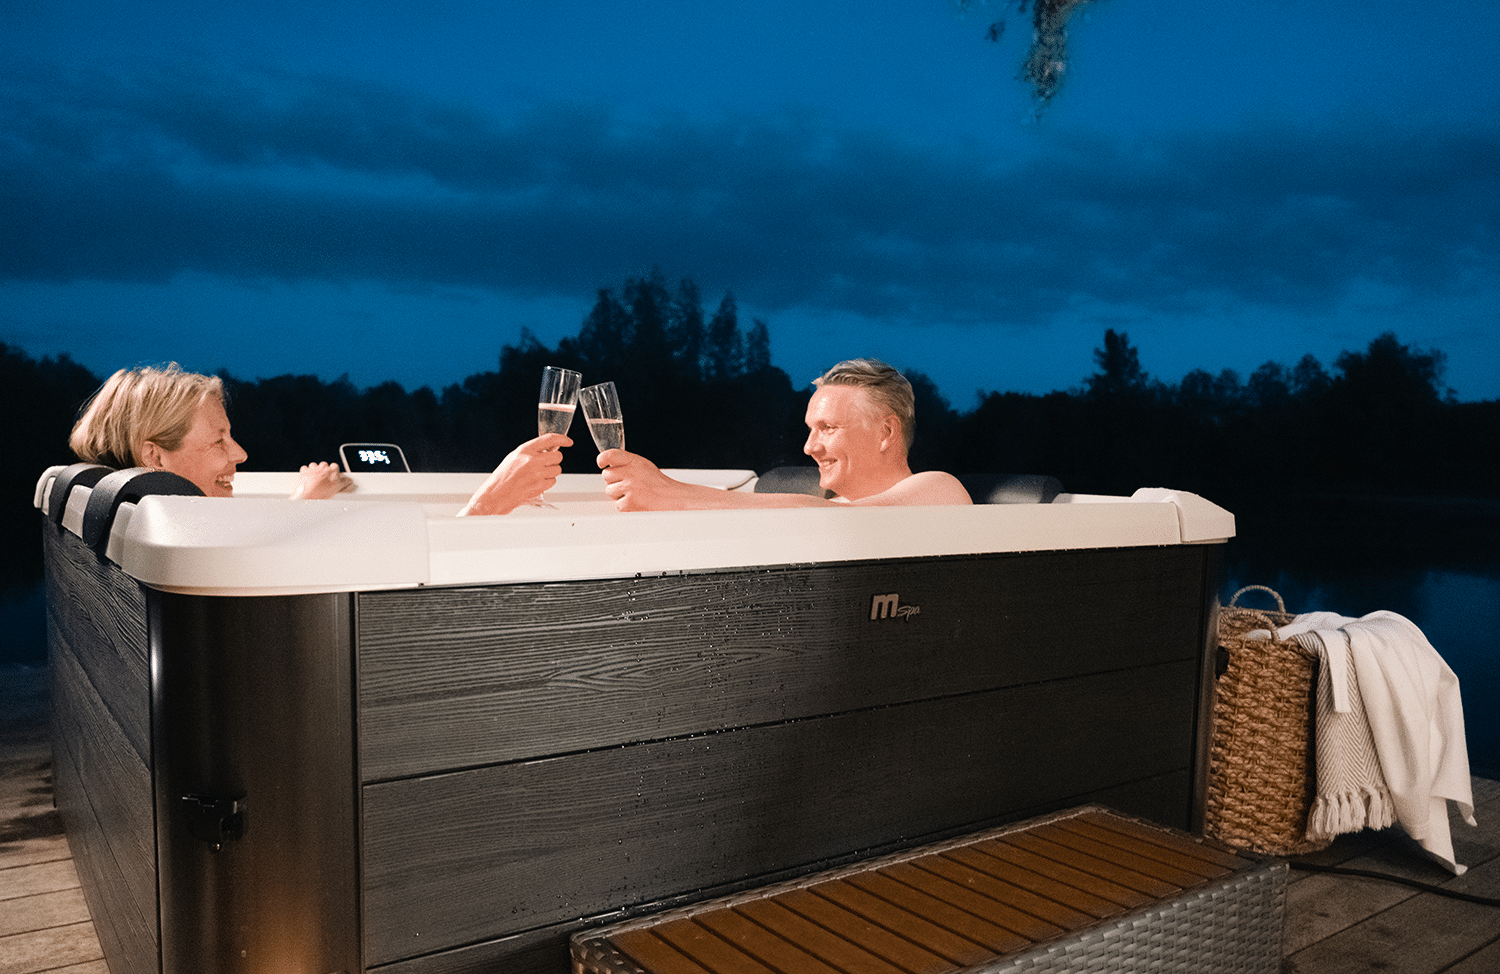 Buy Best Online Portable and Inflatable Hot Tub at MSpa UK